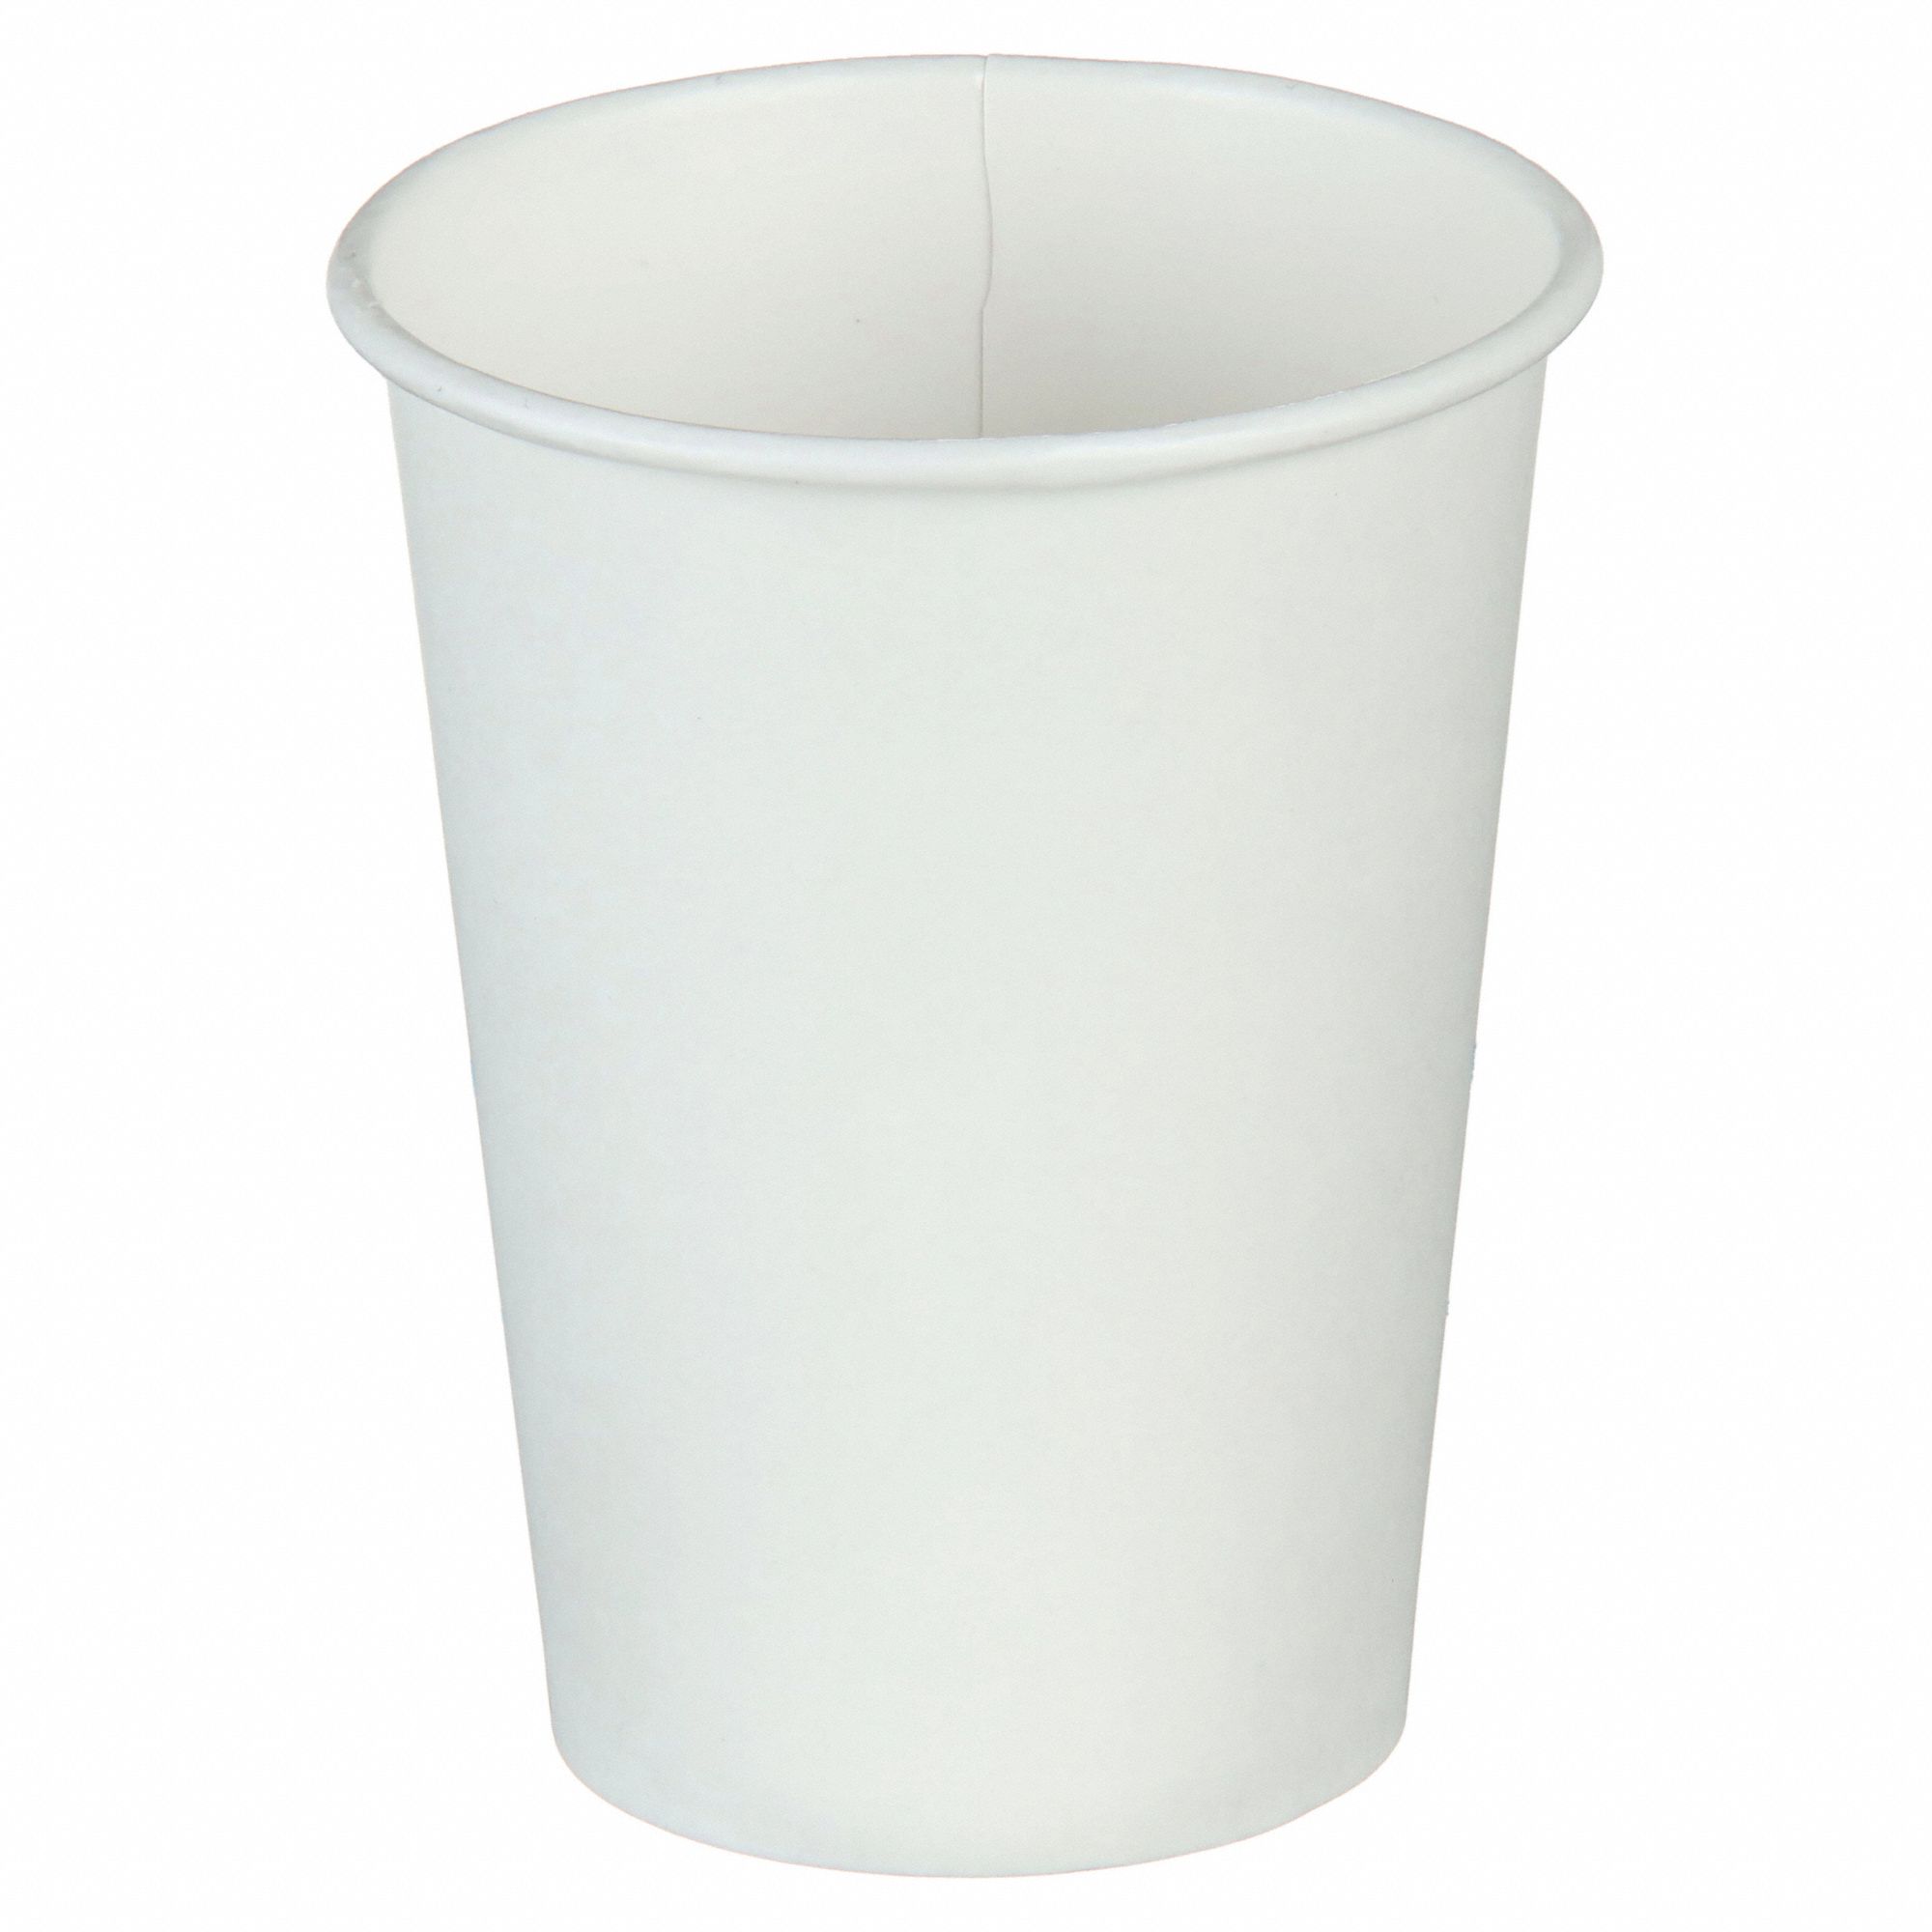  16 Oz. White Disposable Drink Foam Cups Hot and Cold